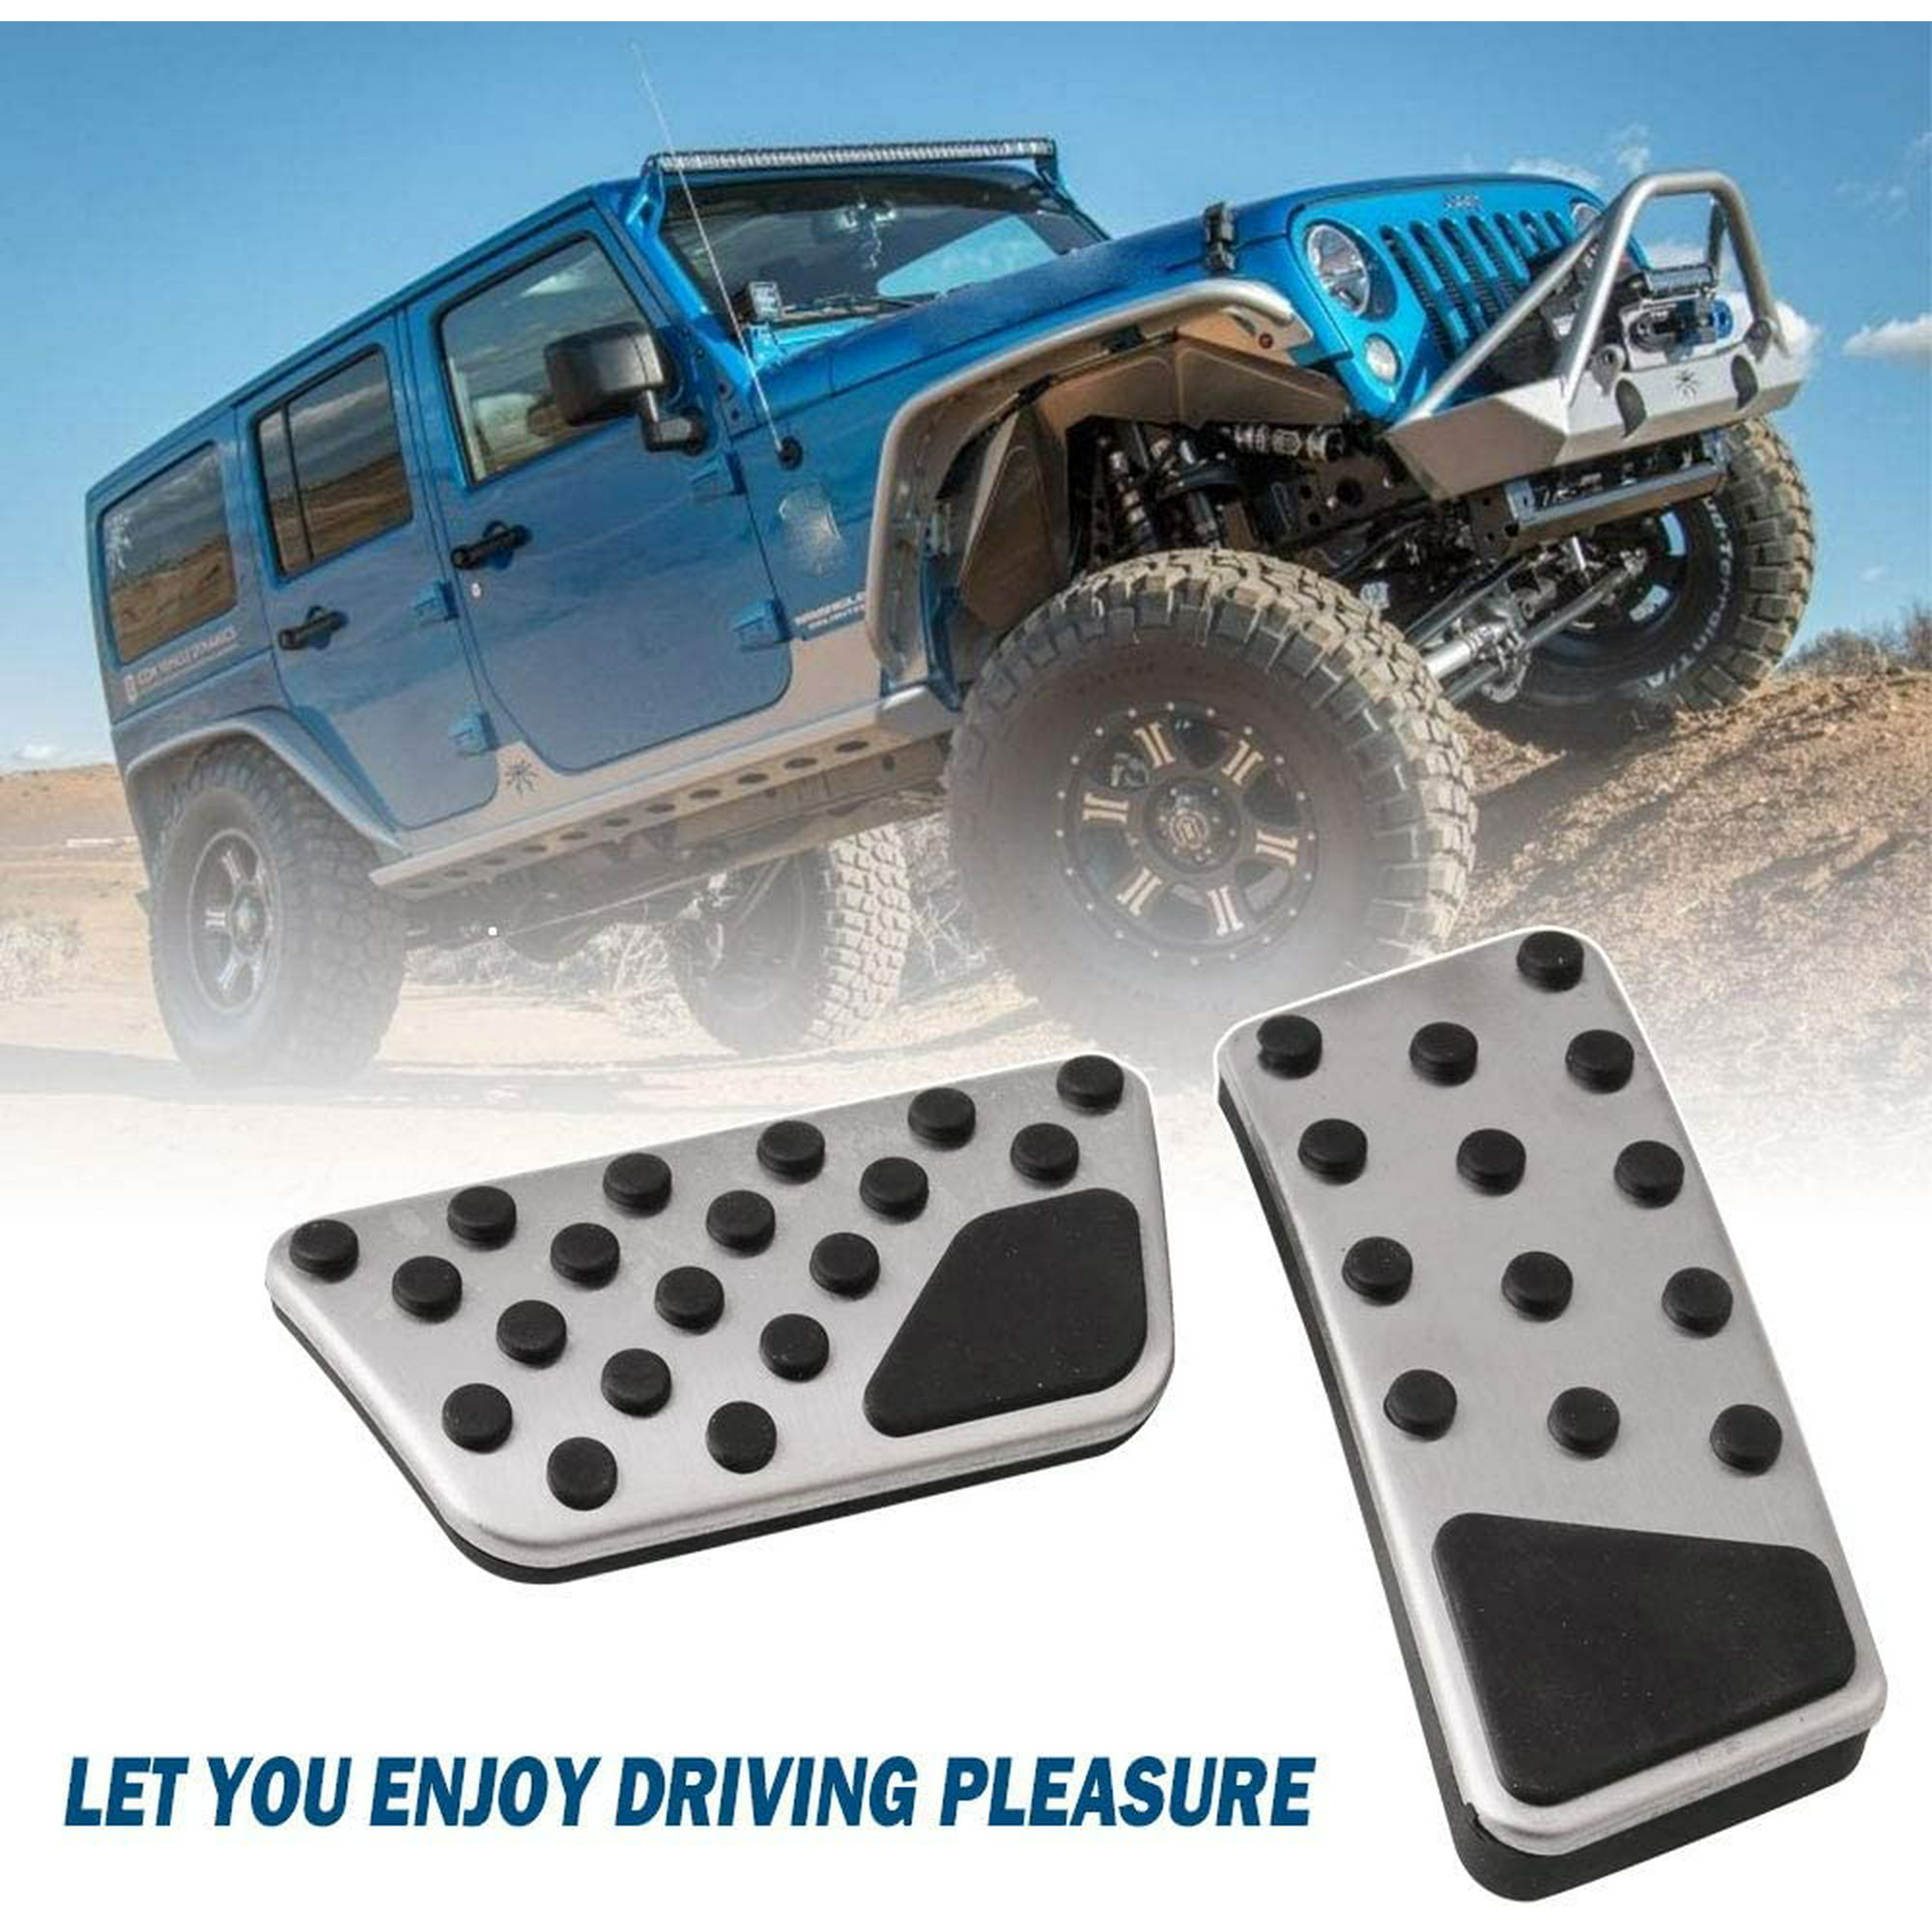 Accelerator Brake Pedal Cover Gas Pedal Punch-Free Metal Pedal Compatible  with Jeep Wrangler JK JKU 2007-2018 | Walmart Canada